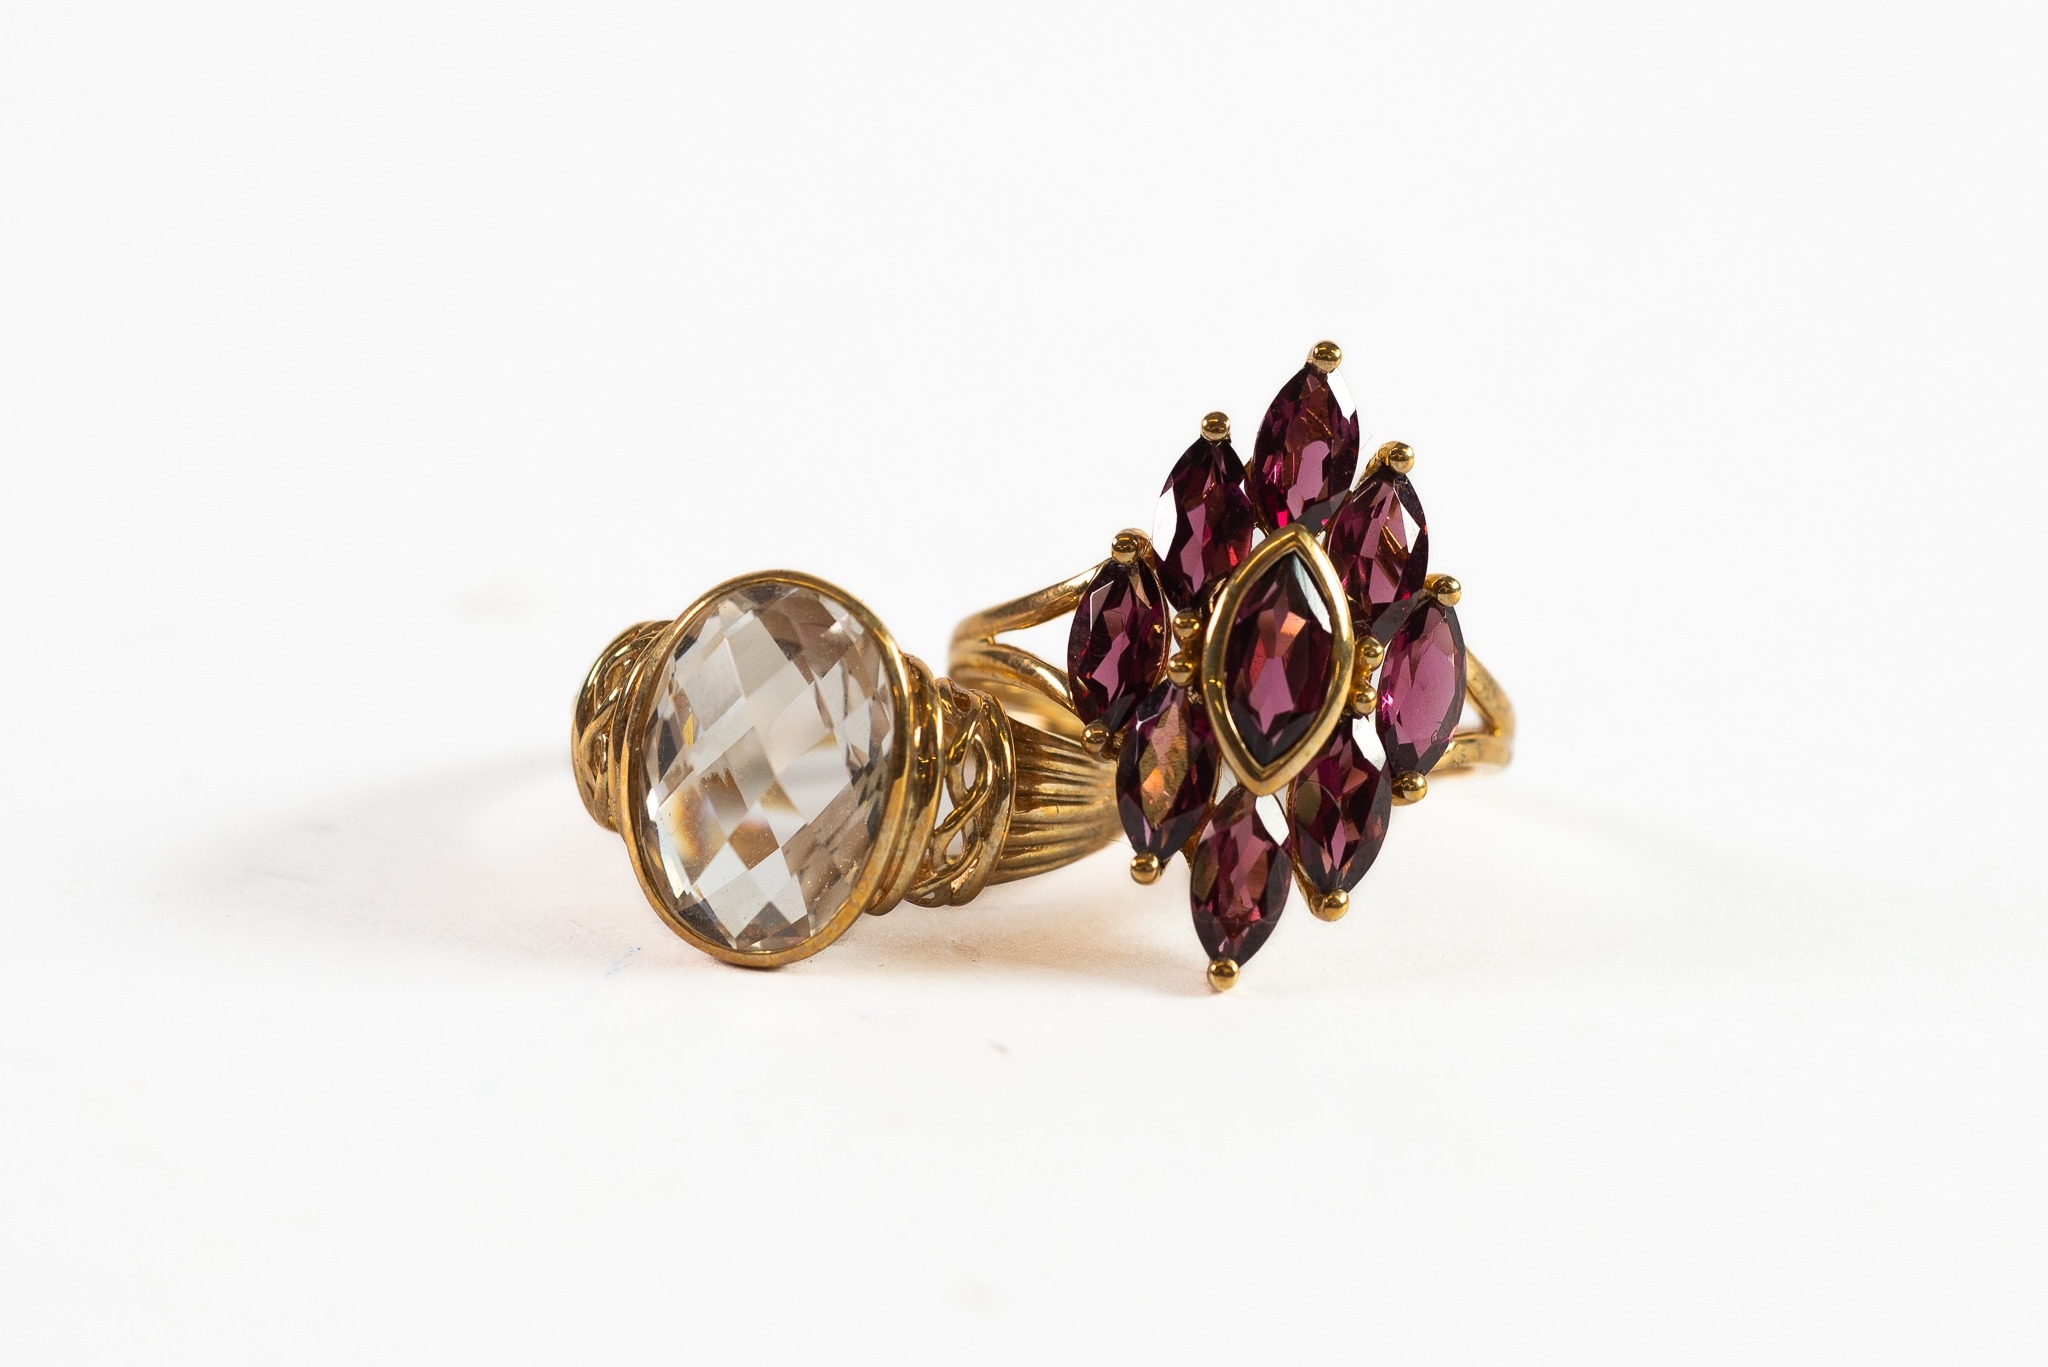 9ct GOLD RING with large oval rock crystal, chequerboard cut with carved shoulders; 9ct GOLD